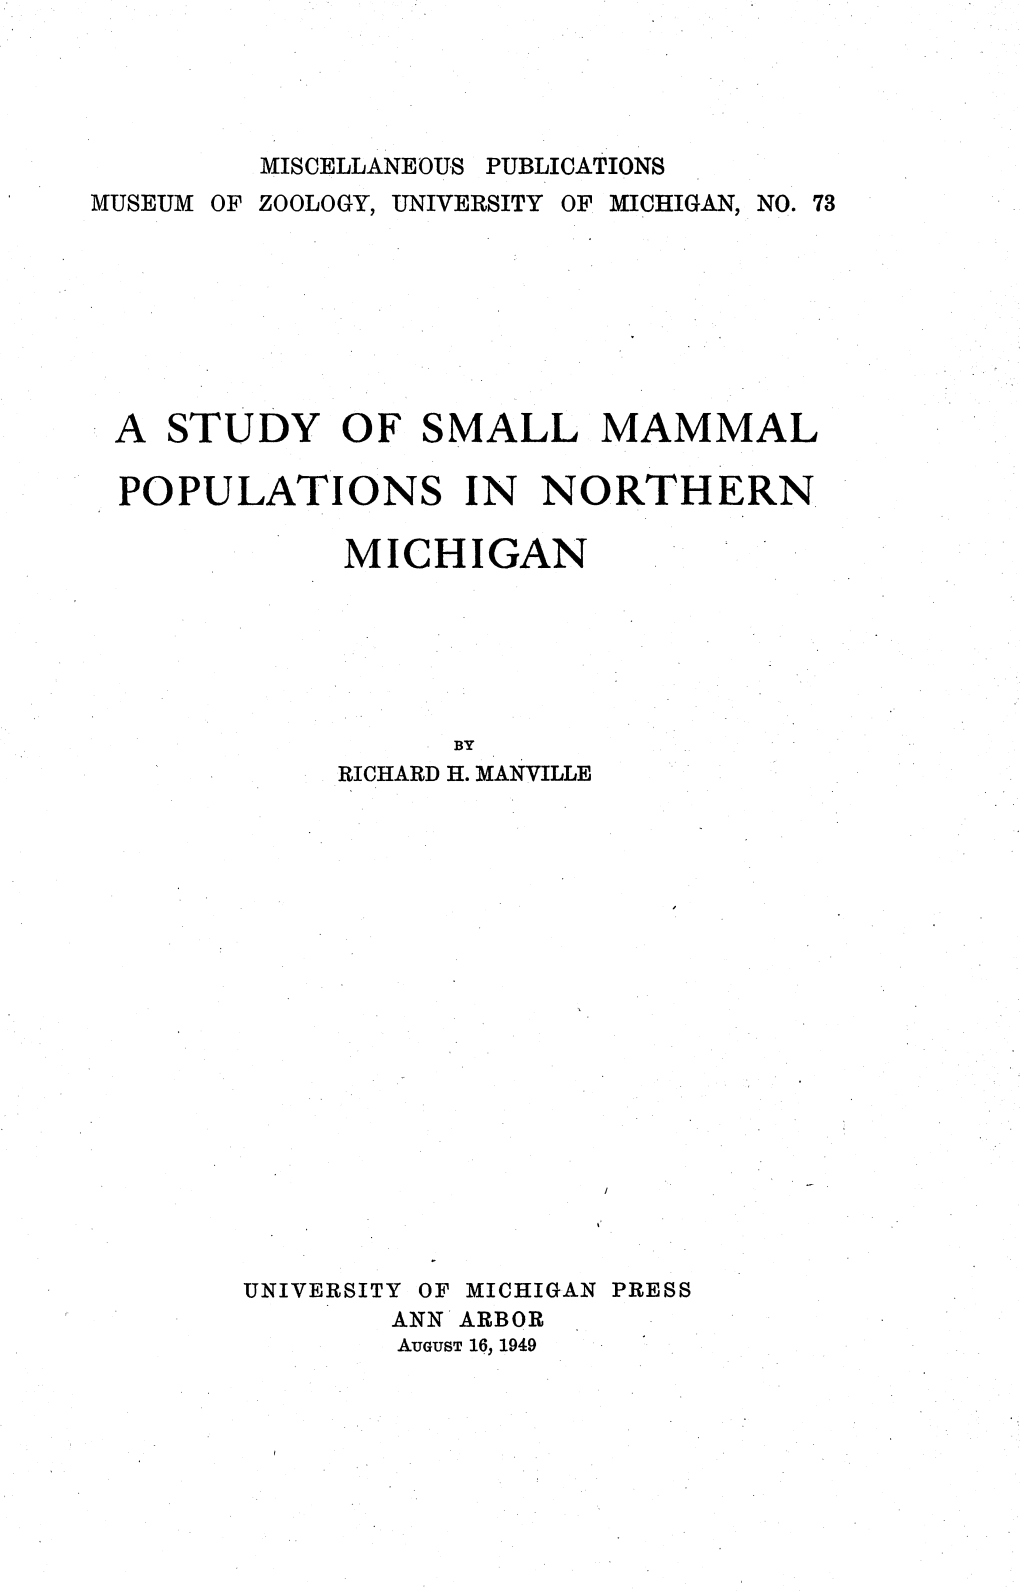 A Study of Small Mammal Populations in Northern Michigan